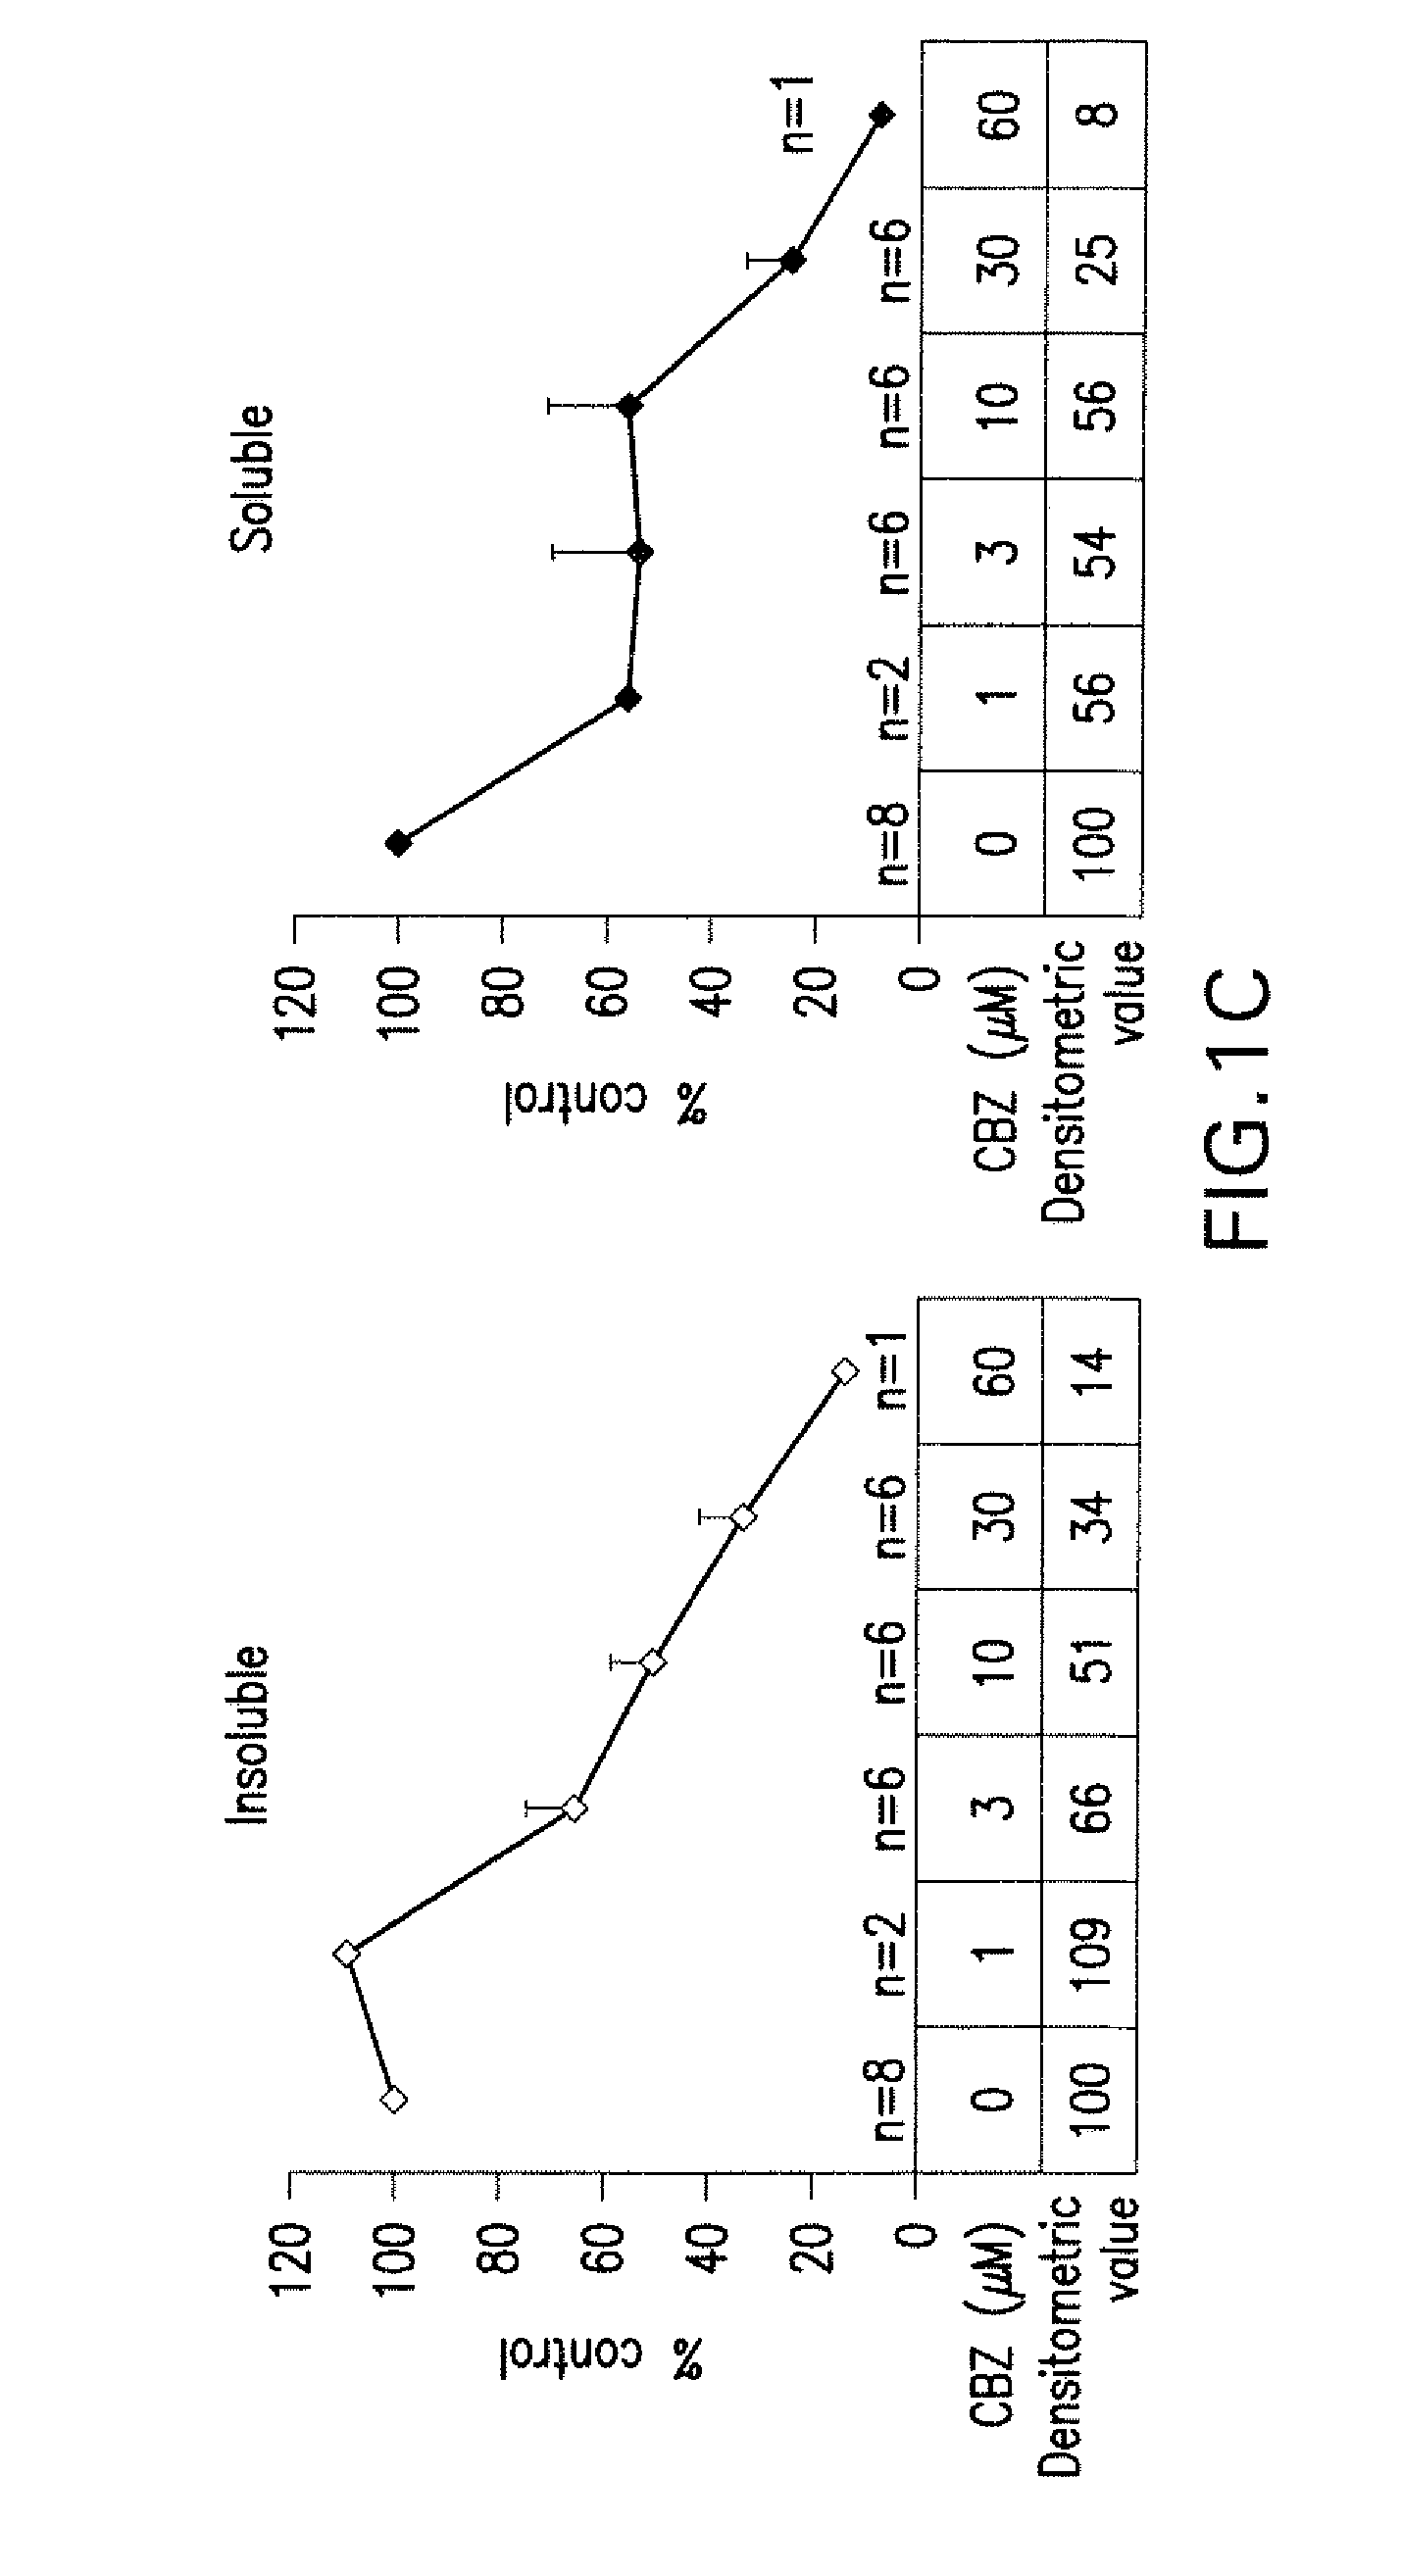 Methods of treating disorders associated with protein polymerization